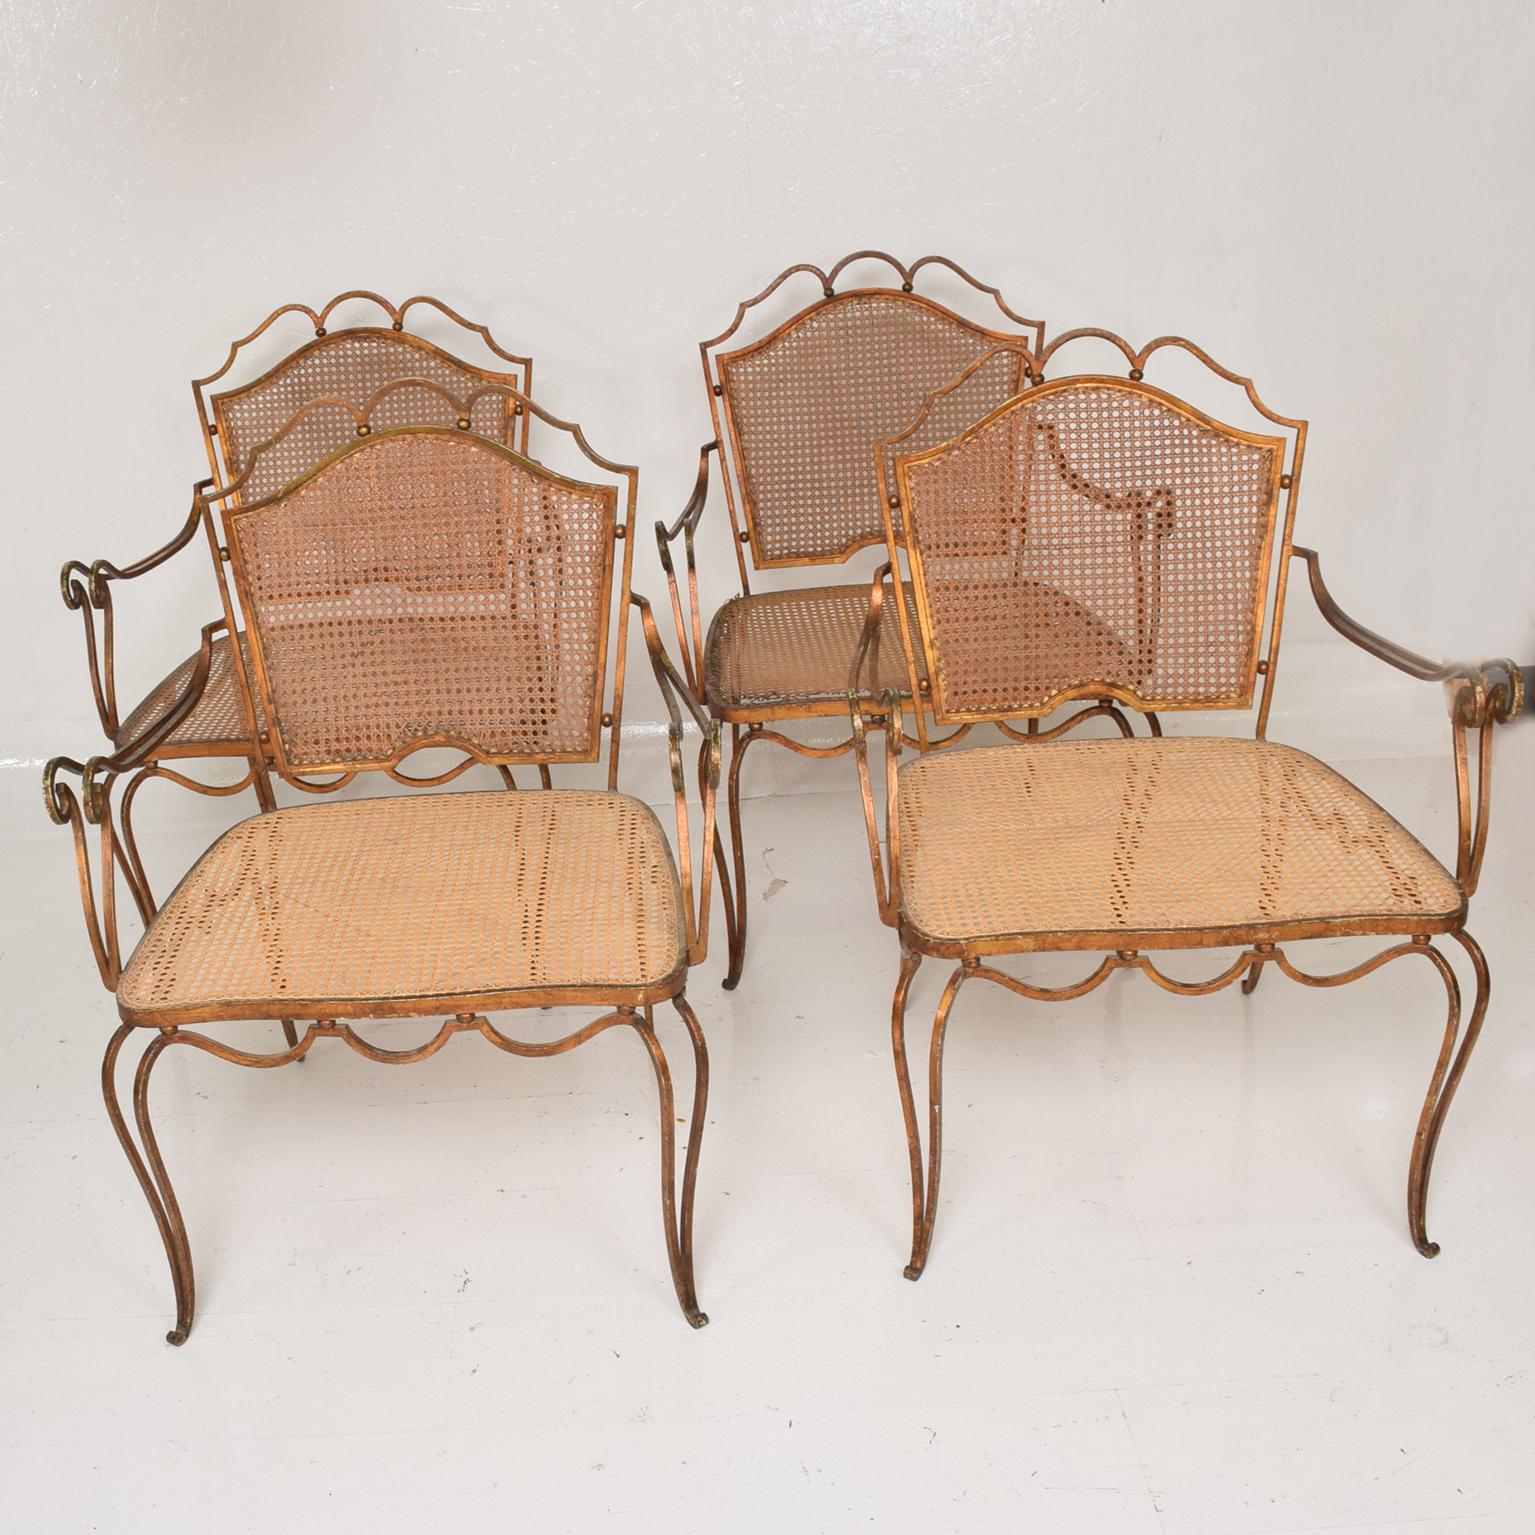 For your consideration, a Mexican modernist armchairs by Arturo Pani armchair, four chairs are available. 

Mexico City, circa 1950s.
Forged iron with gold leaf finish and wicker seat and backrest.
Dimensions: 33 3/4